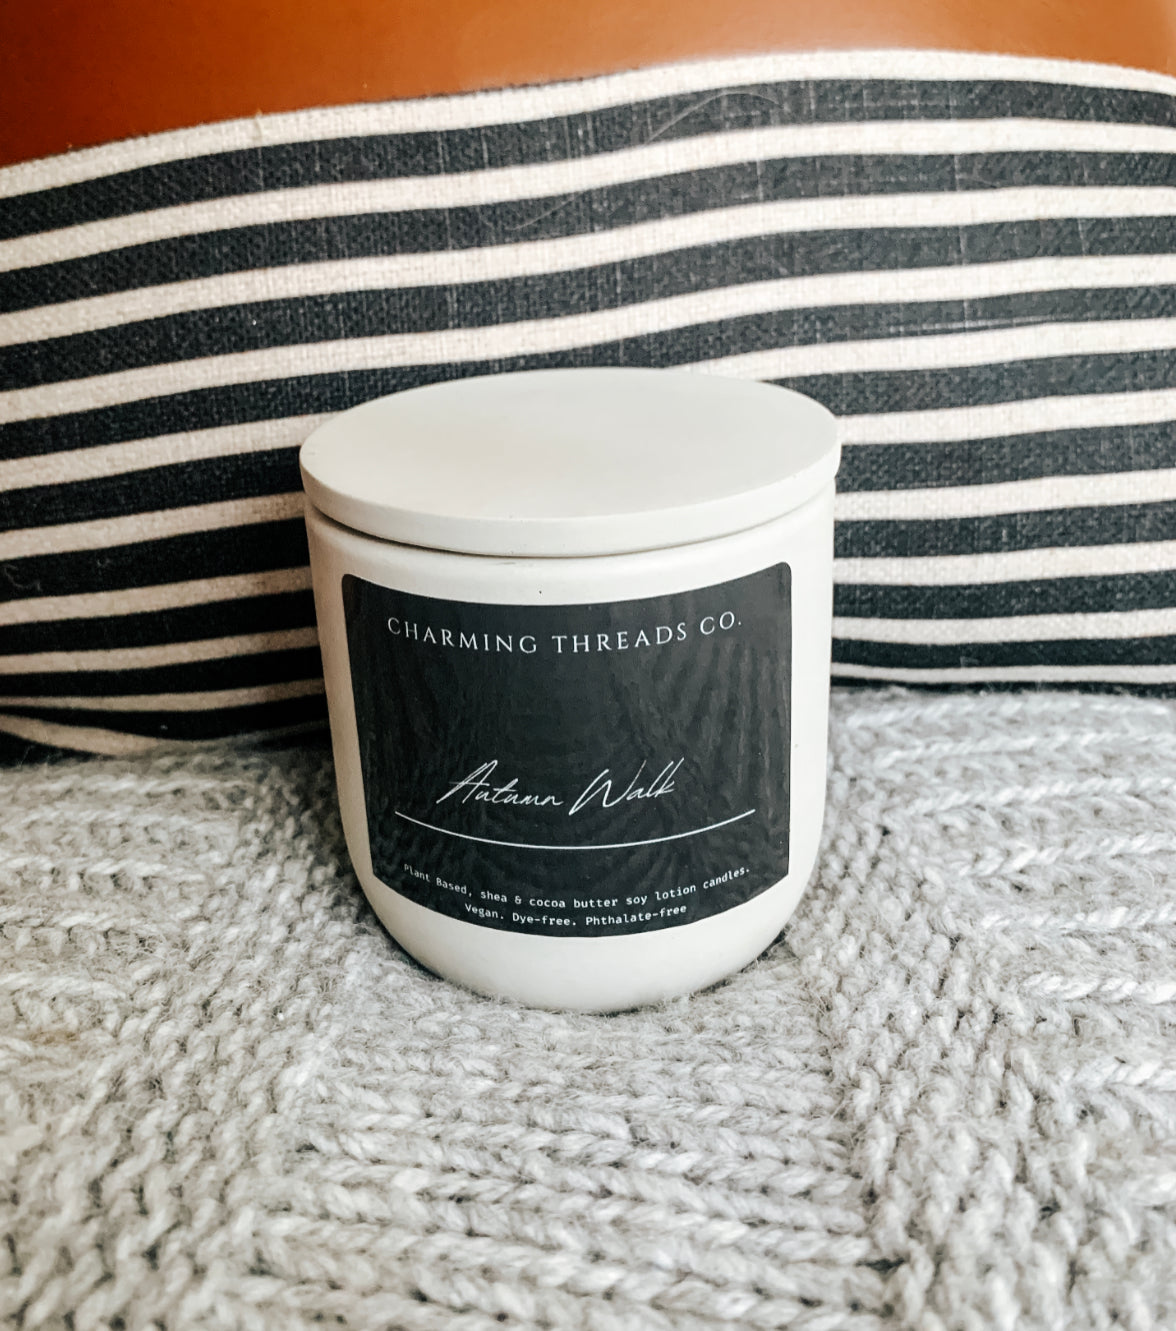 Autumn Walk Charming Threads Lotion Candle